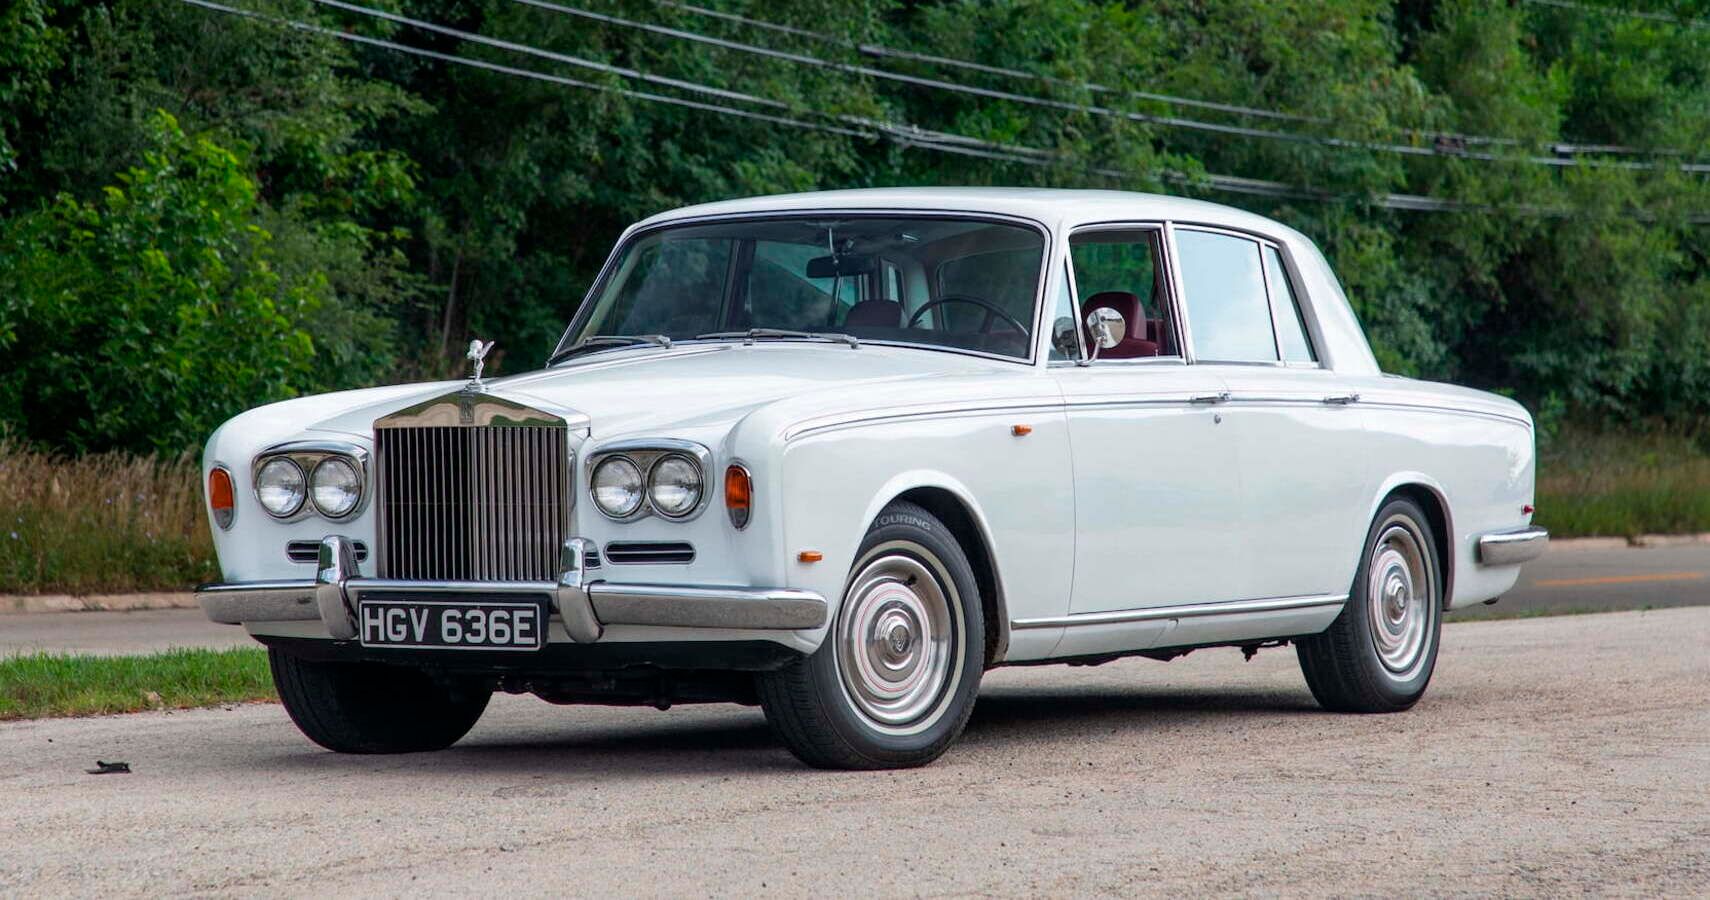 A white 1969 Rolls-Royce Silver Shadow parked